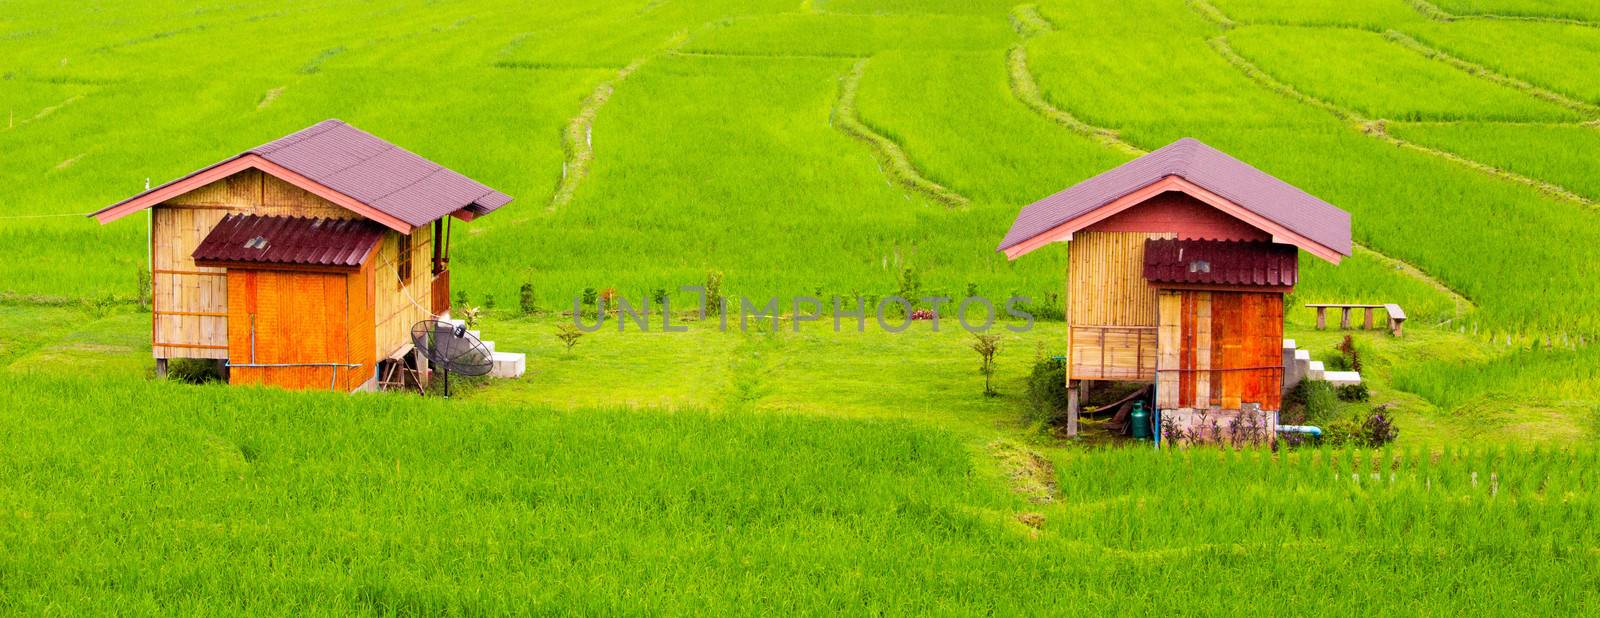 The The cottage surrounded by rice terraces during the rainy season. surrounded by rice terraces during the rainy season. by TEERASAK